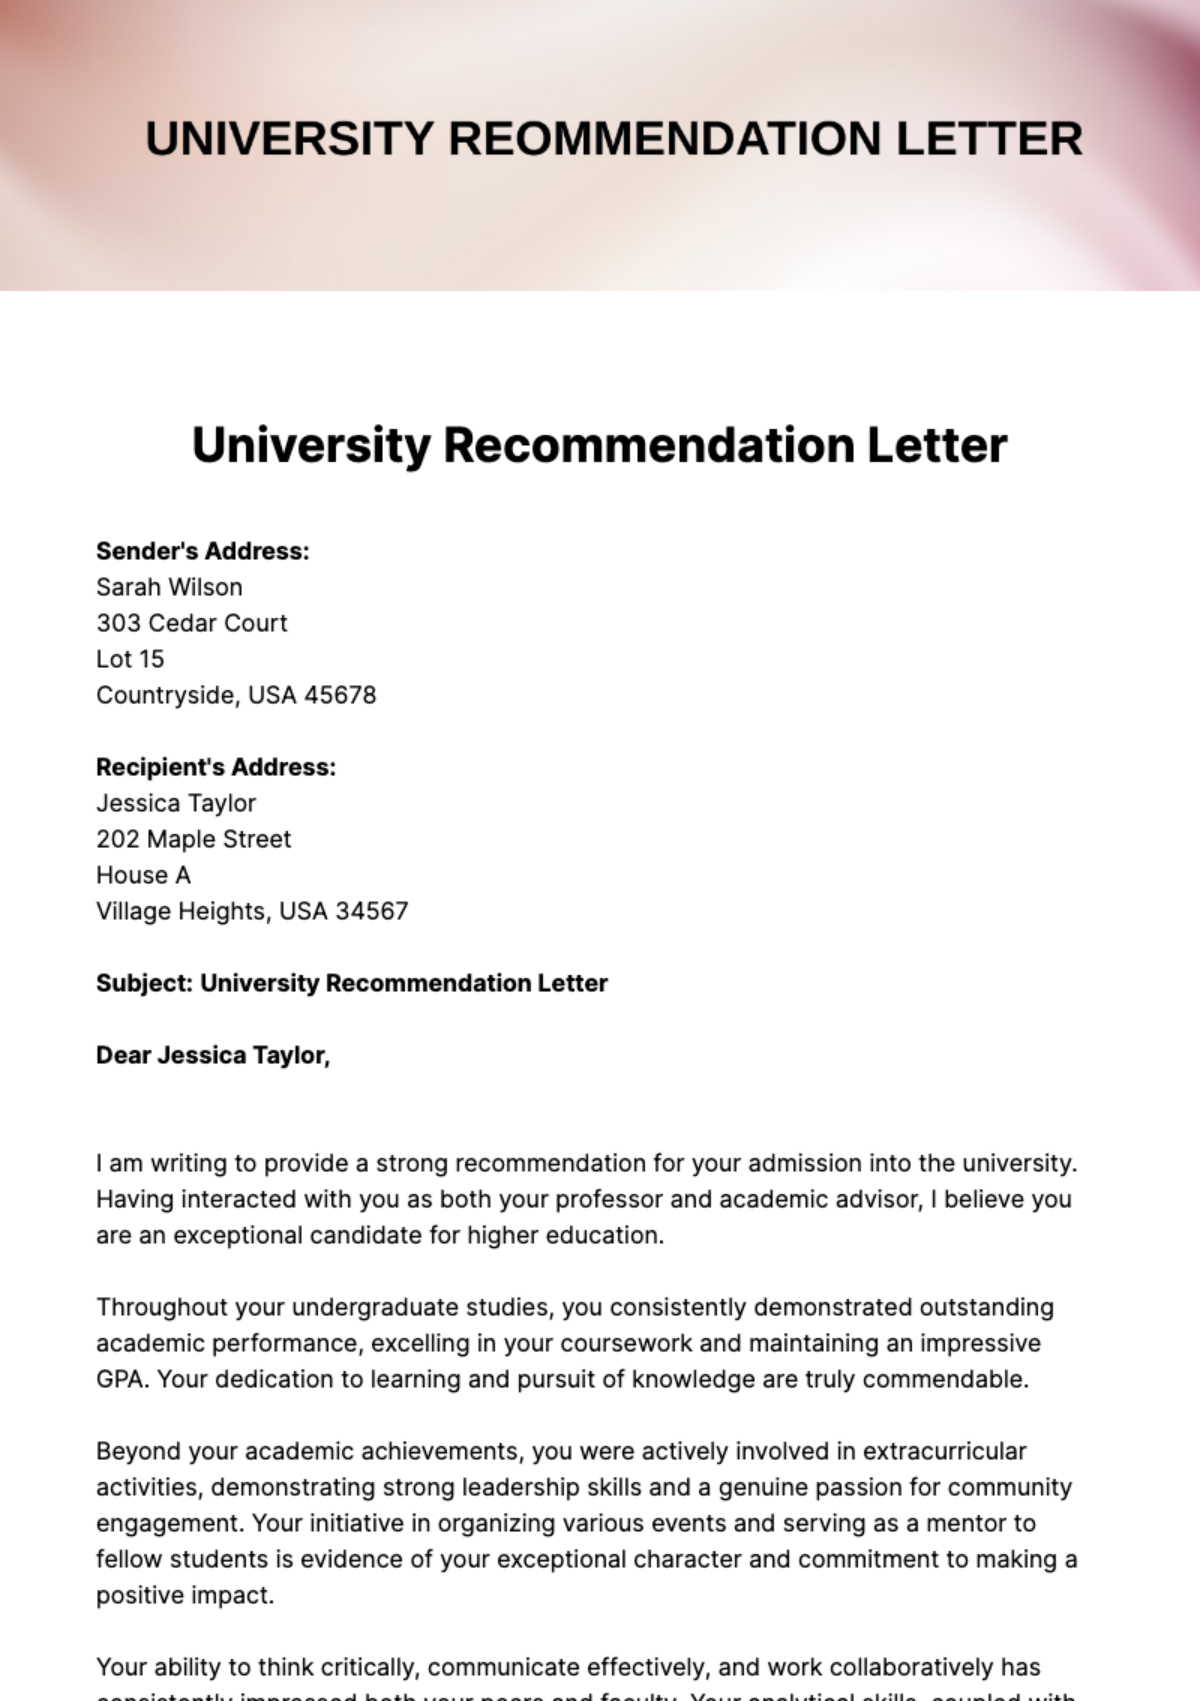 Free University Recommendation Letter Template